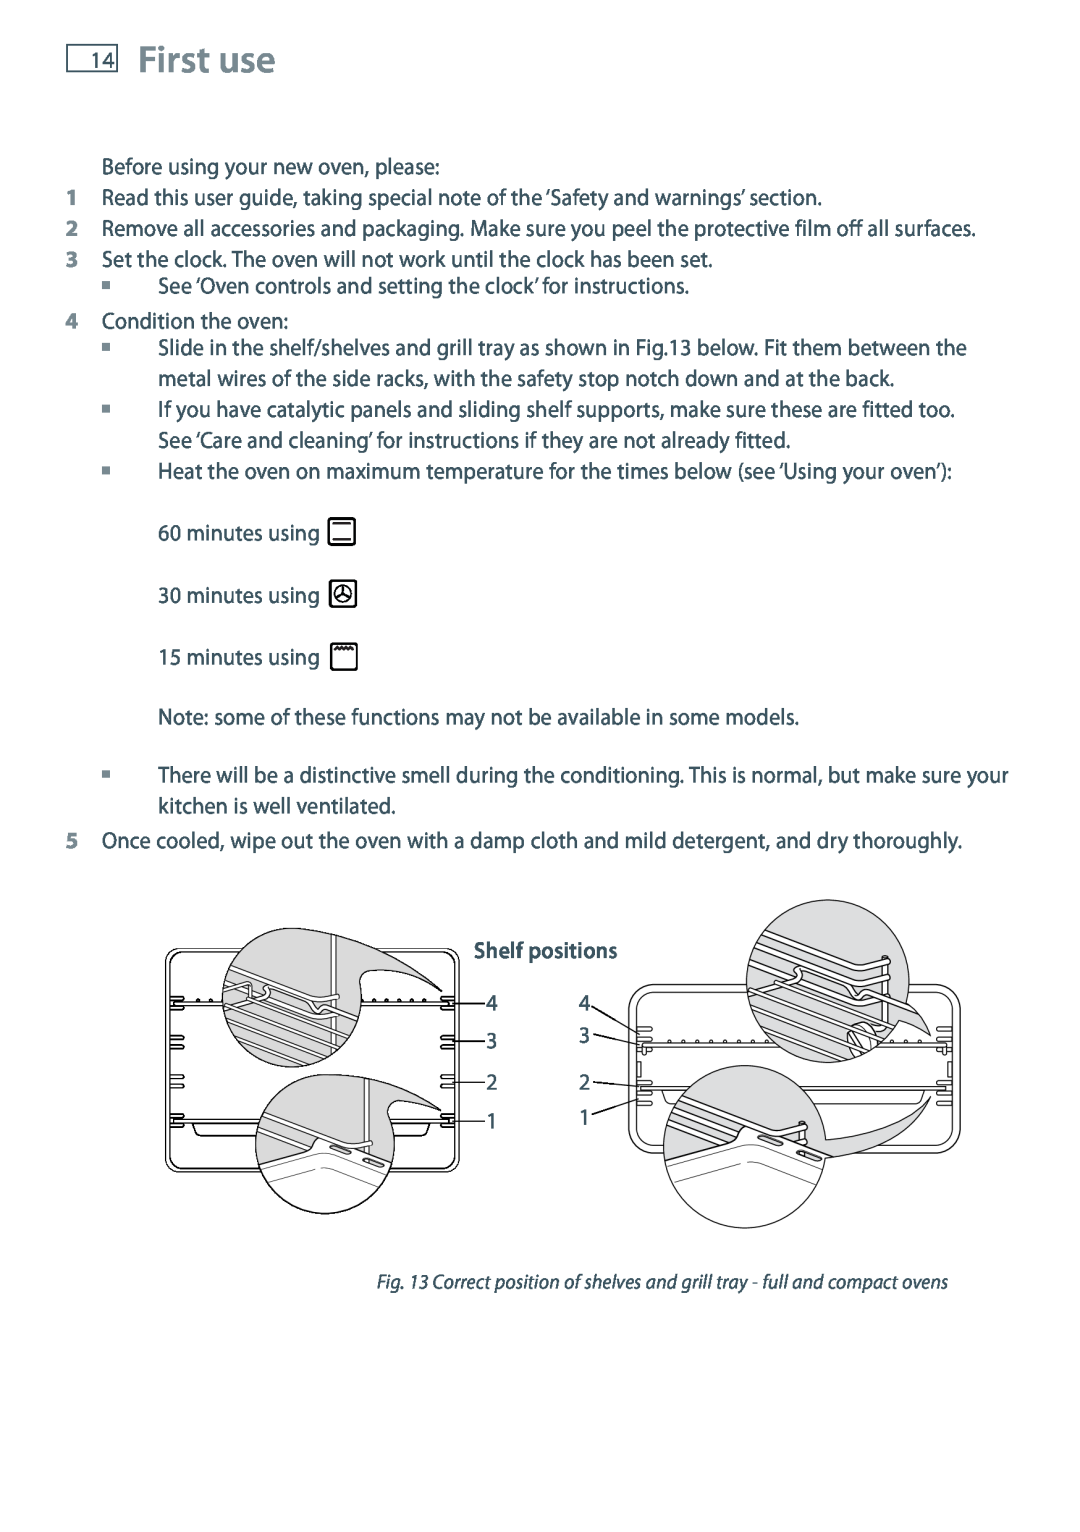 Fisher & Paykel OB60 installation instructions First use, Shelf positions 